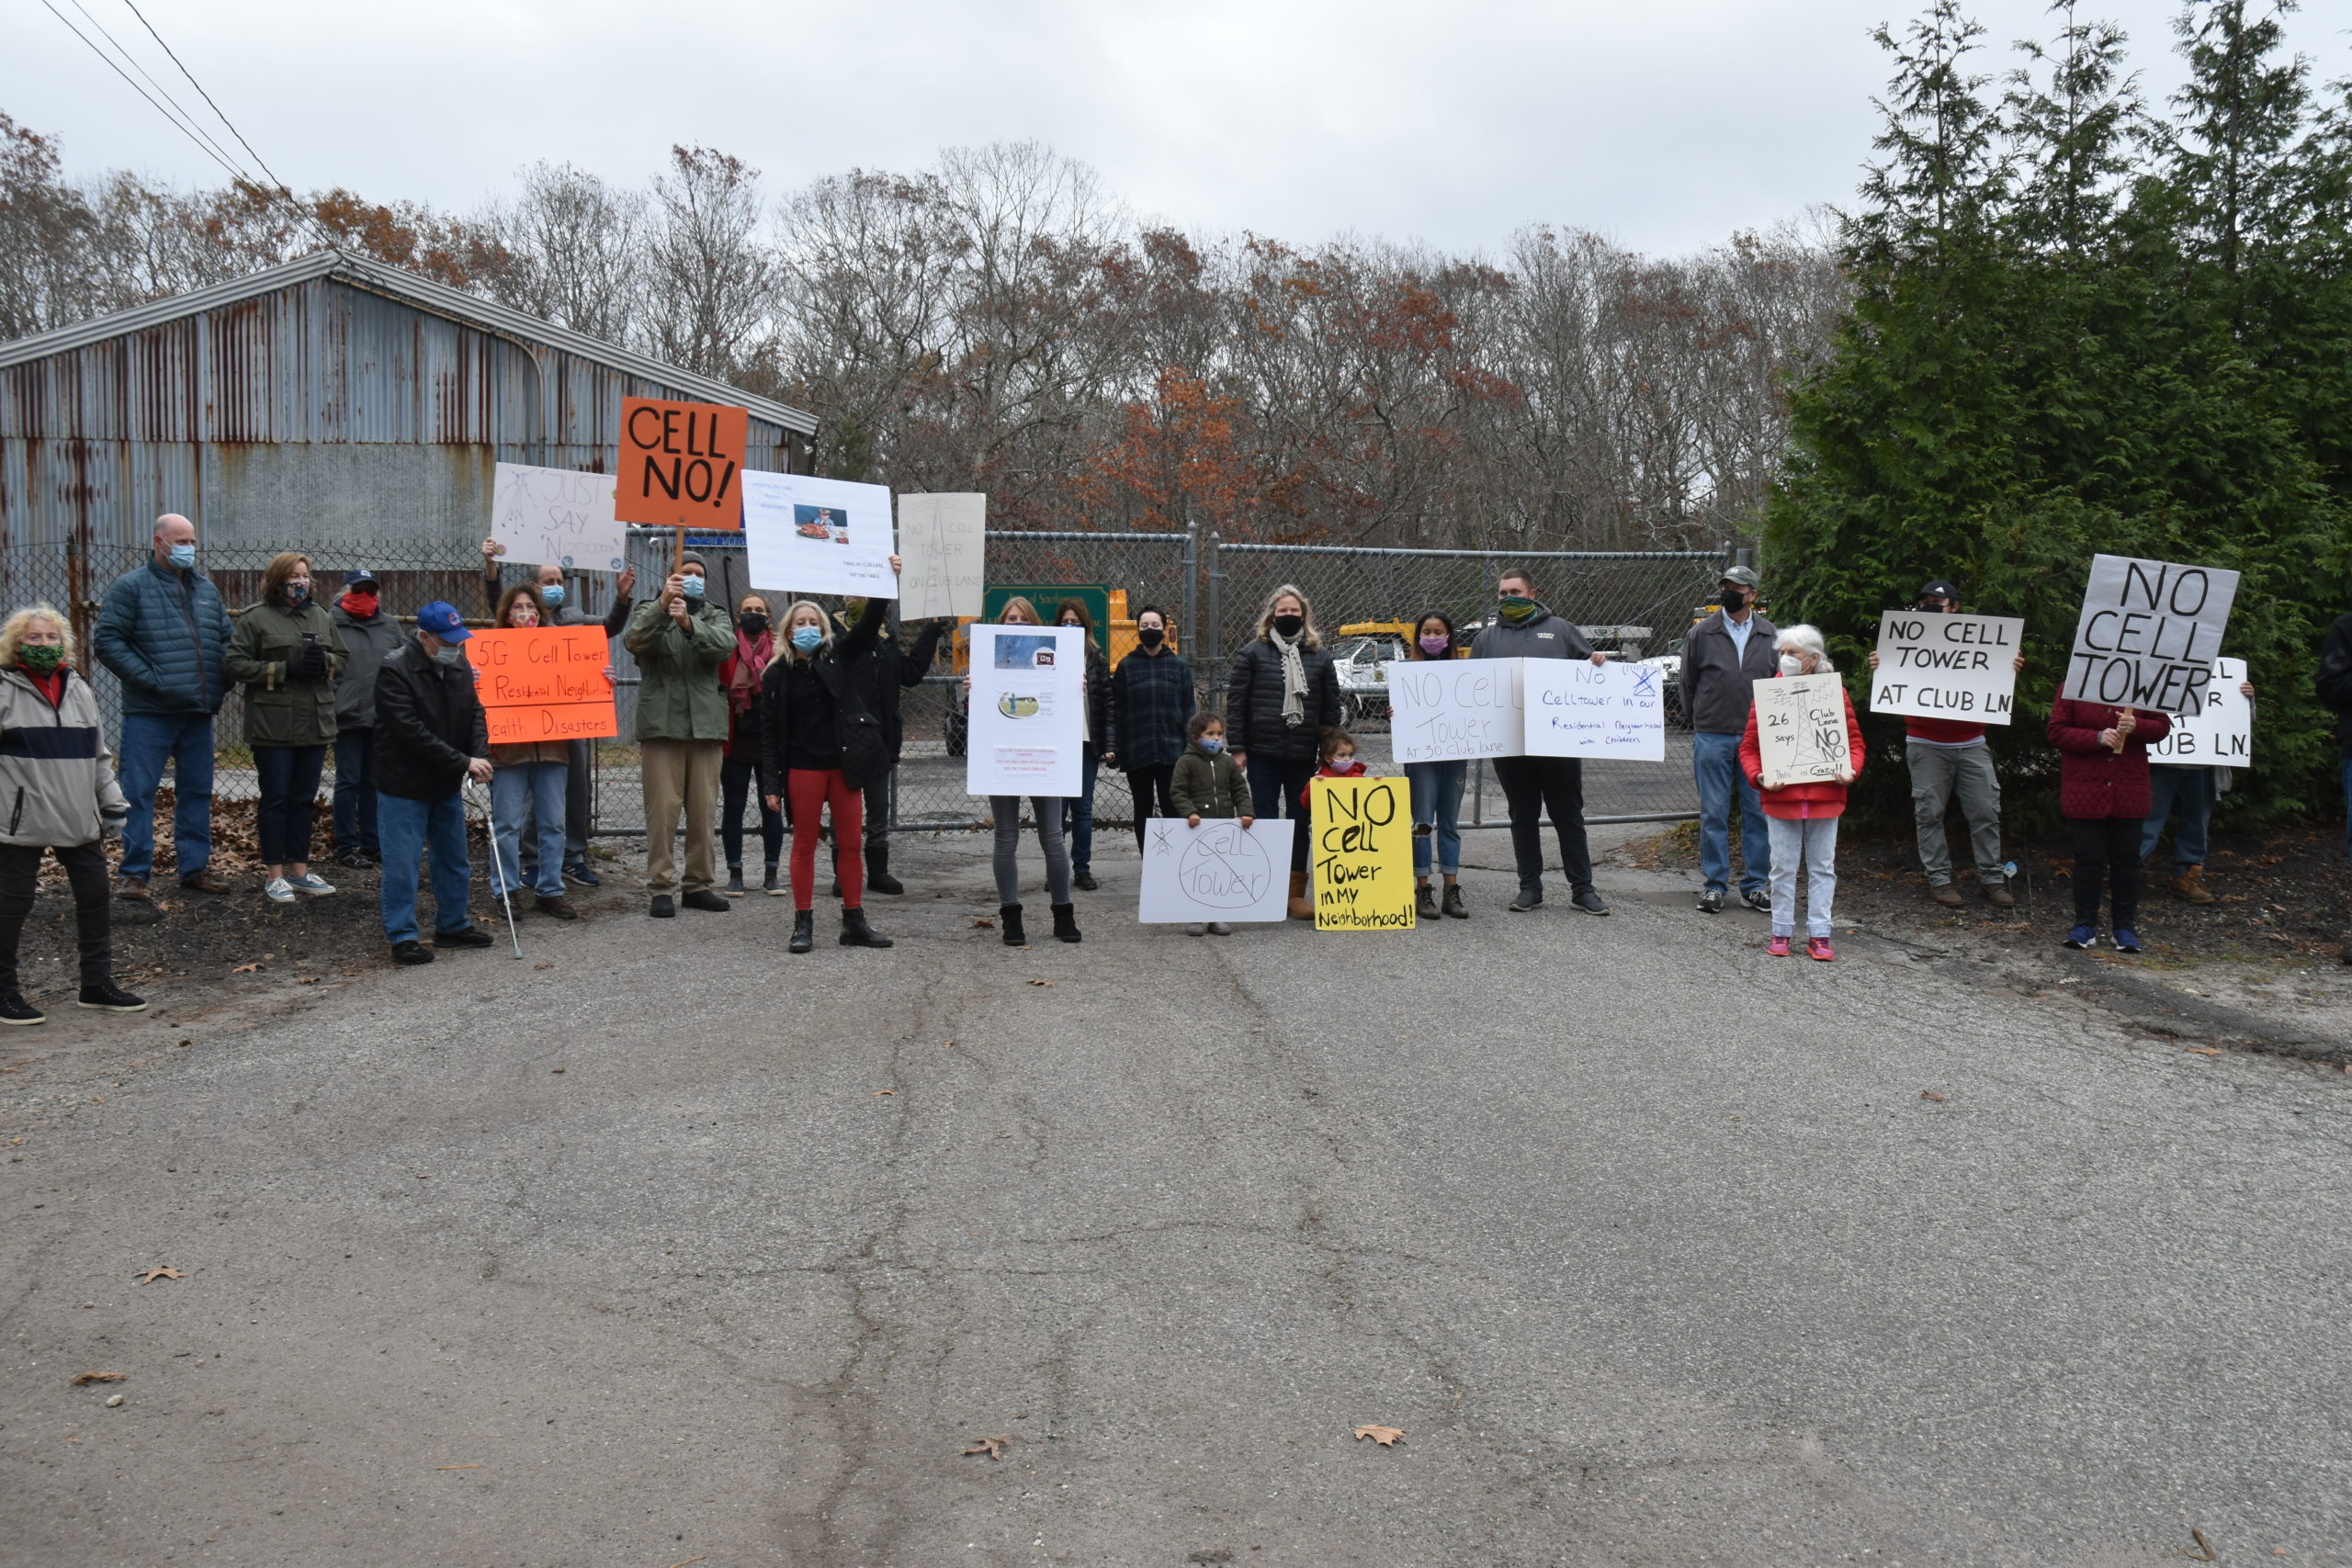 Noyac residents gathered Sunday to protest a proposal to build a cell tower at the Southampton Town Highway Department property at 30 Club Lane. STEPHEN J. KOTZ